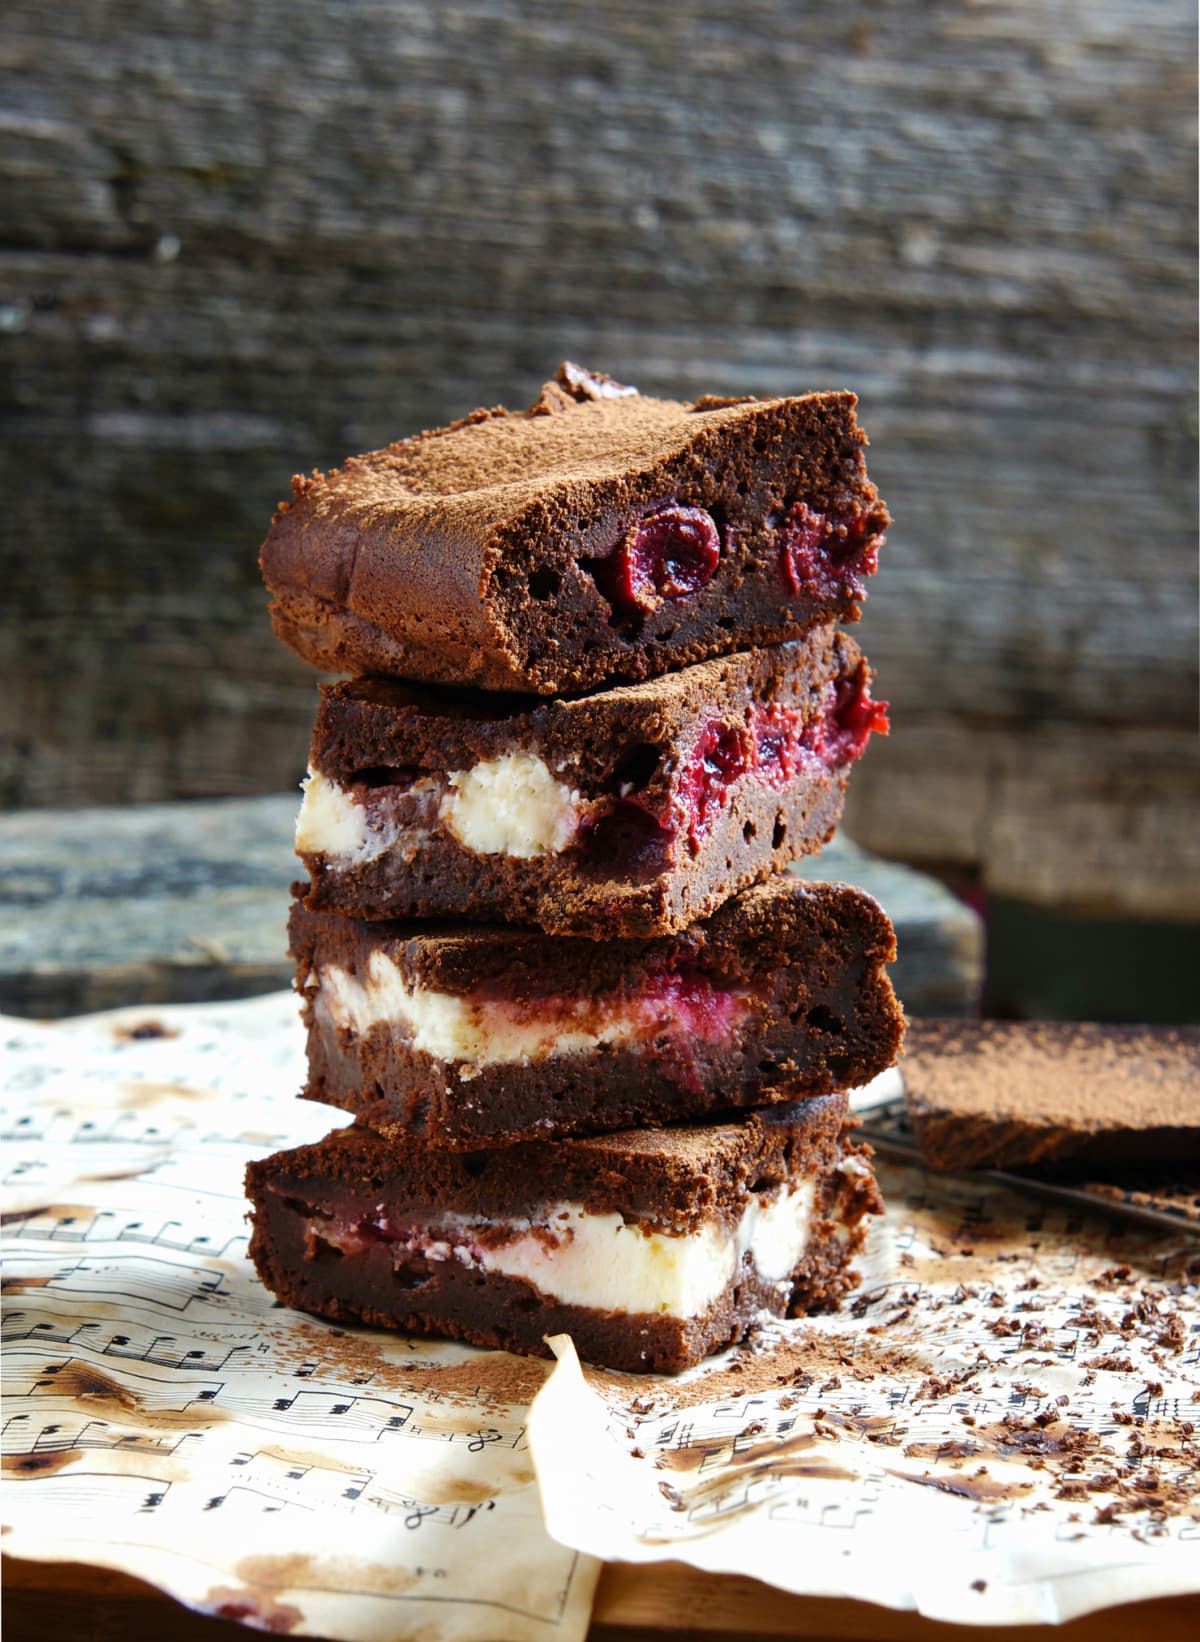 Chocolate brownie with cherry and cream